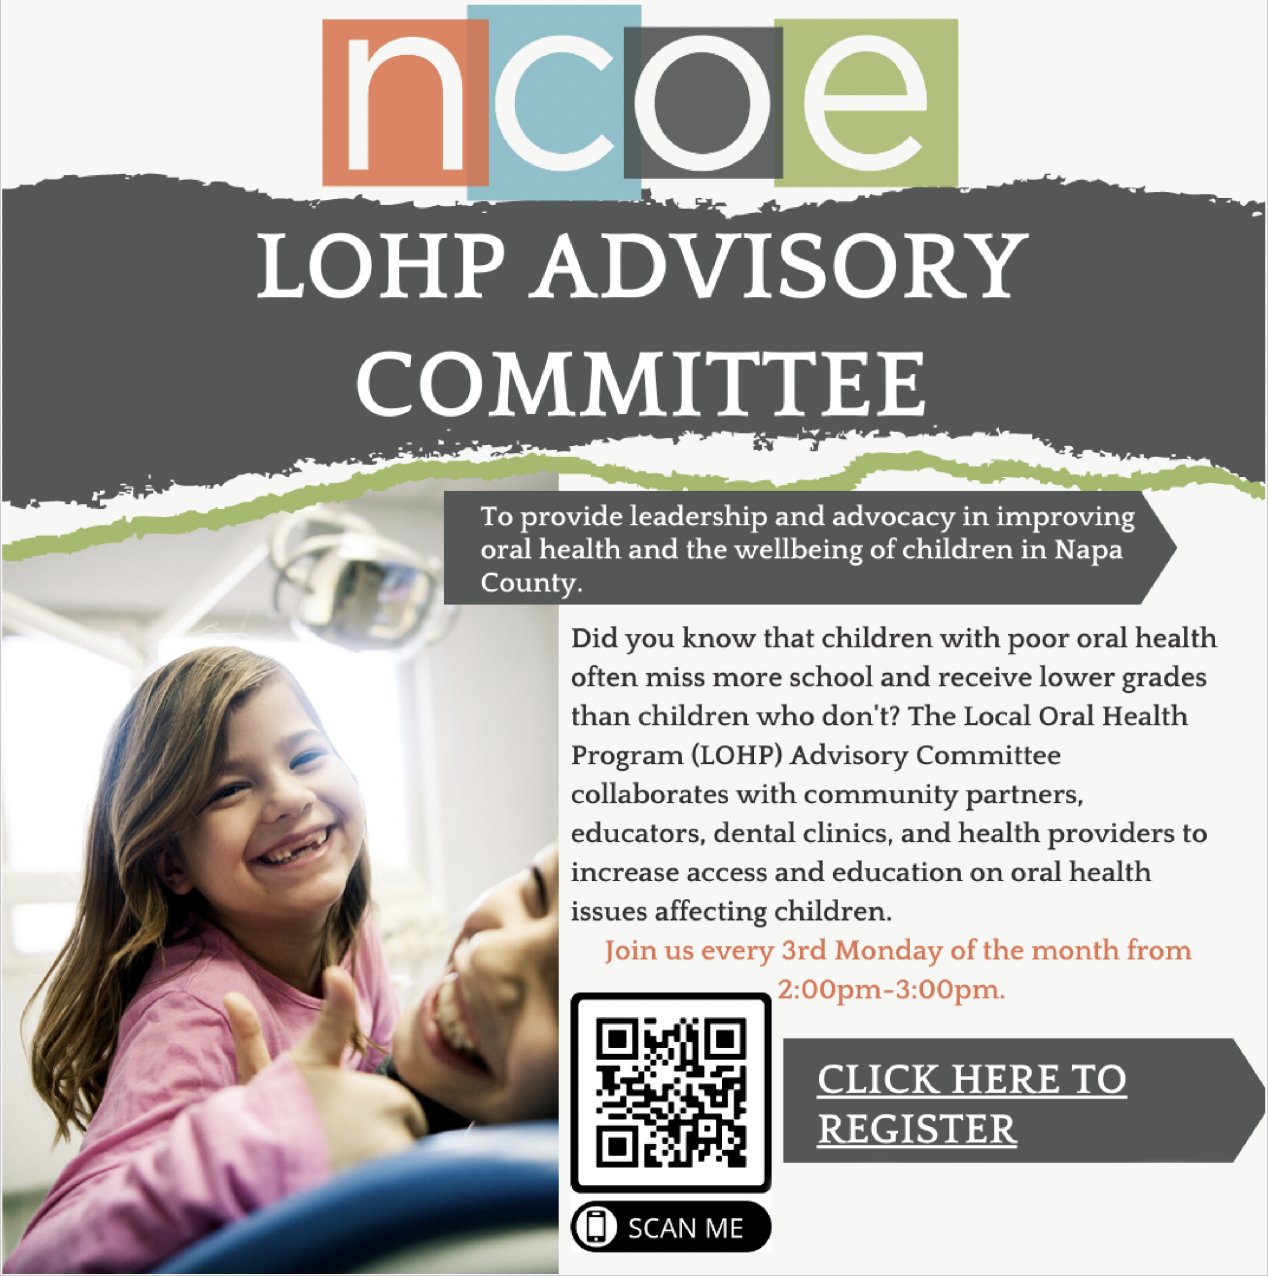 Join the LOHP Advisory Committee